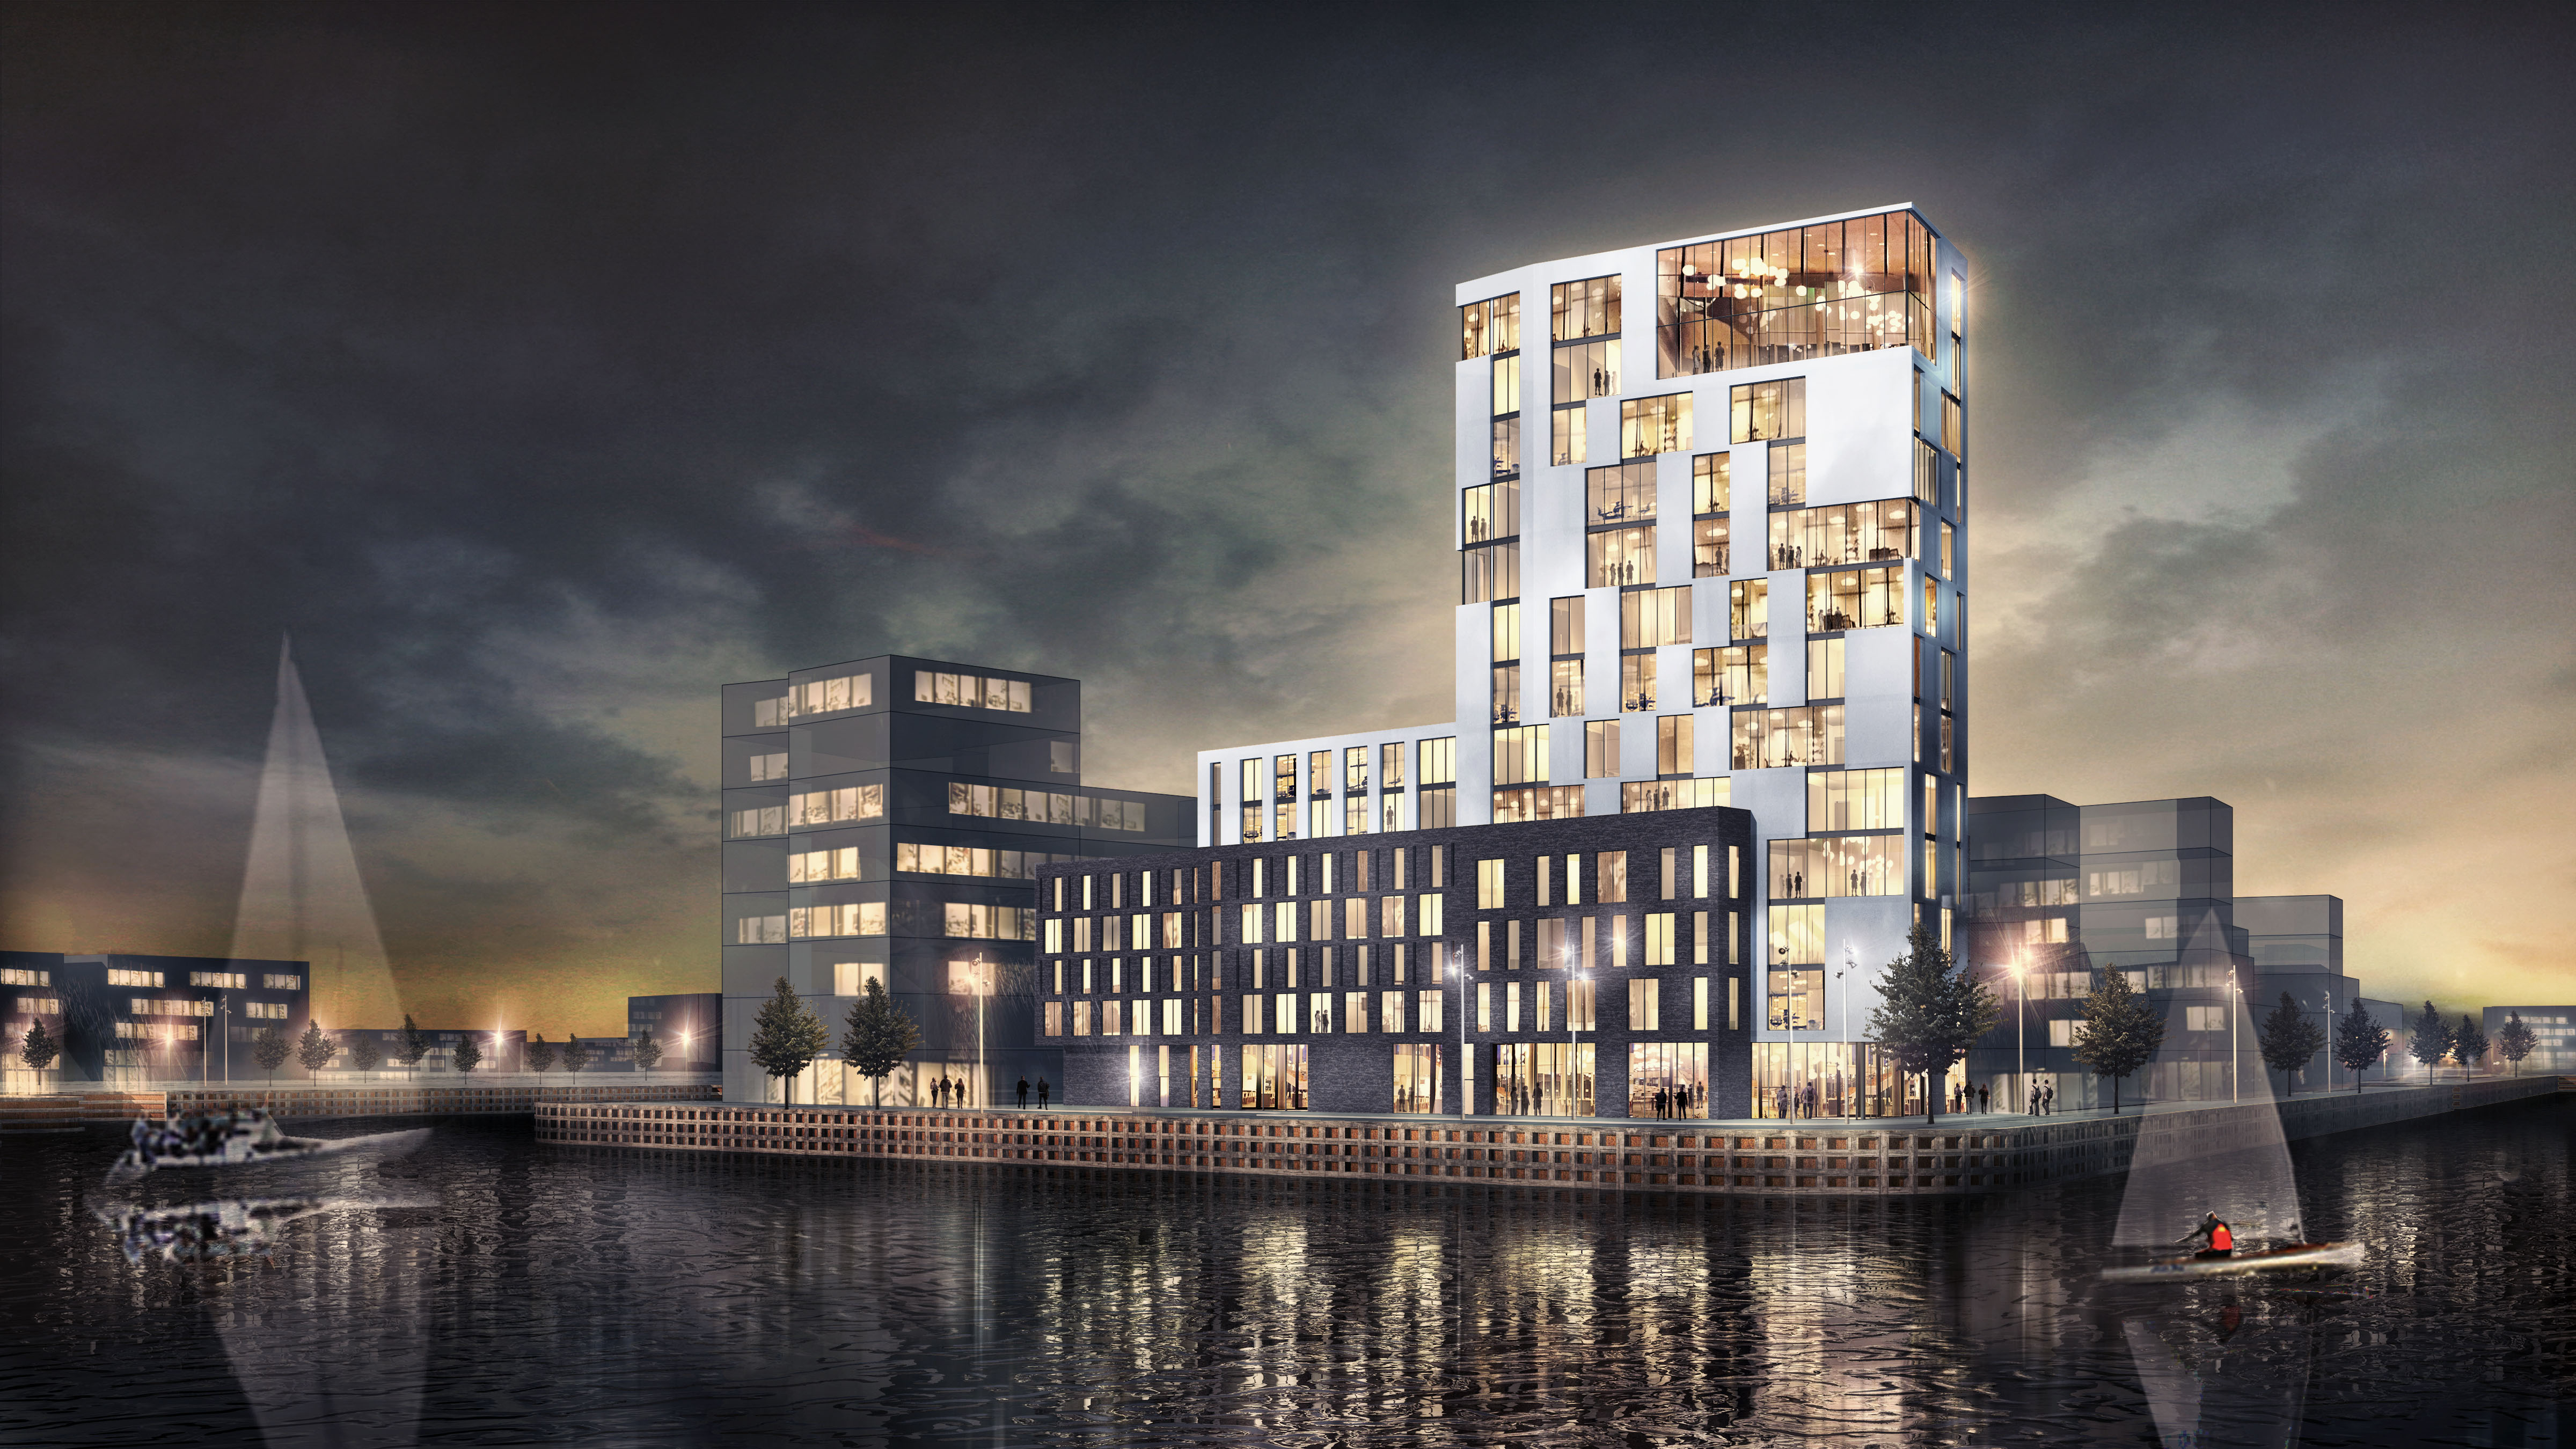 Scandic Hotels Grouphas signed a long-term lease agreement with Midroc Properties for a new hotel in Helsingborg Sweden sl